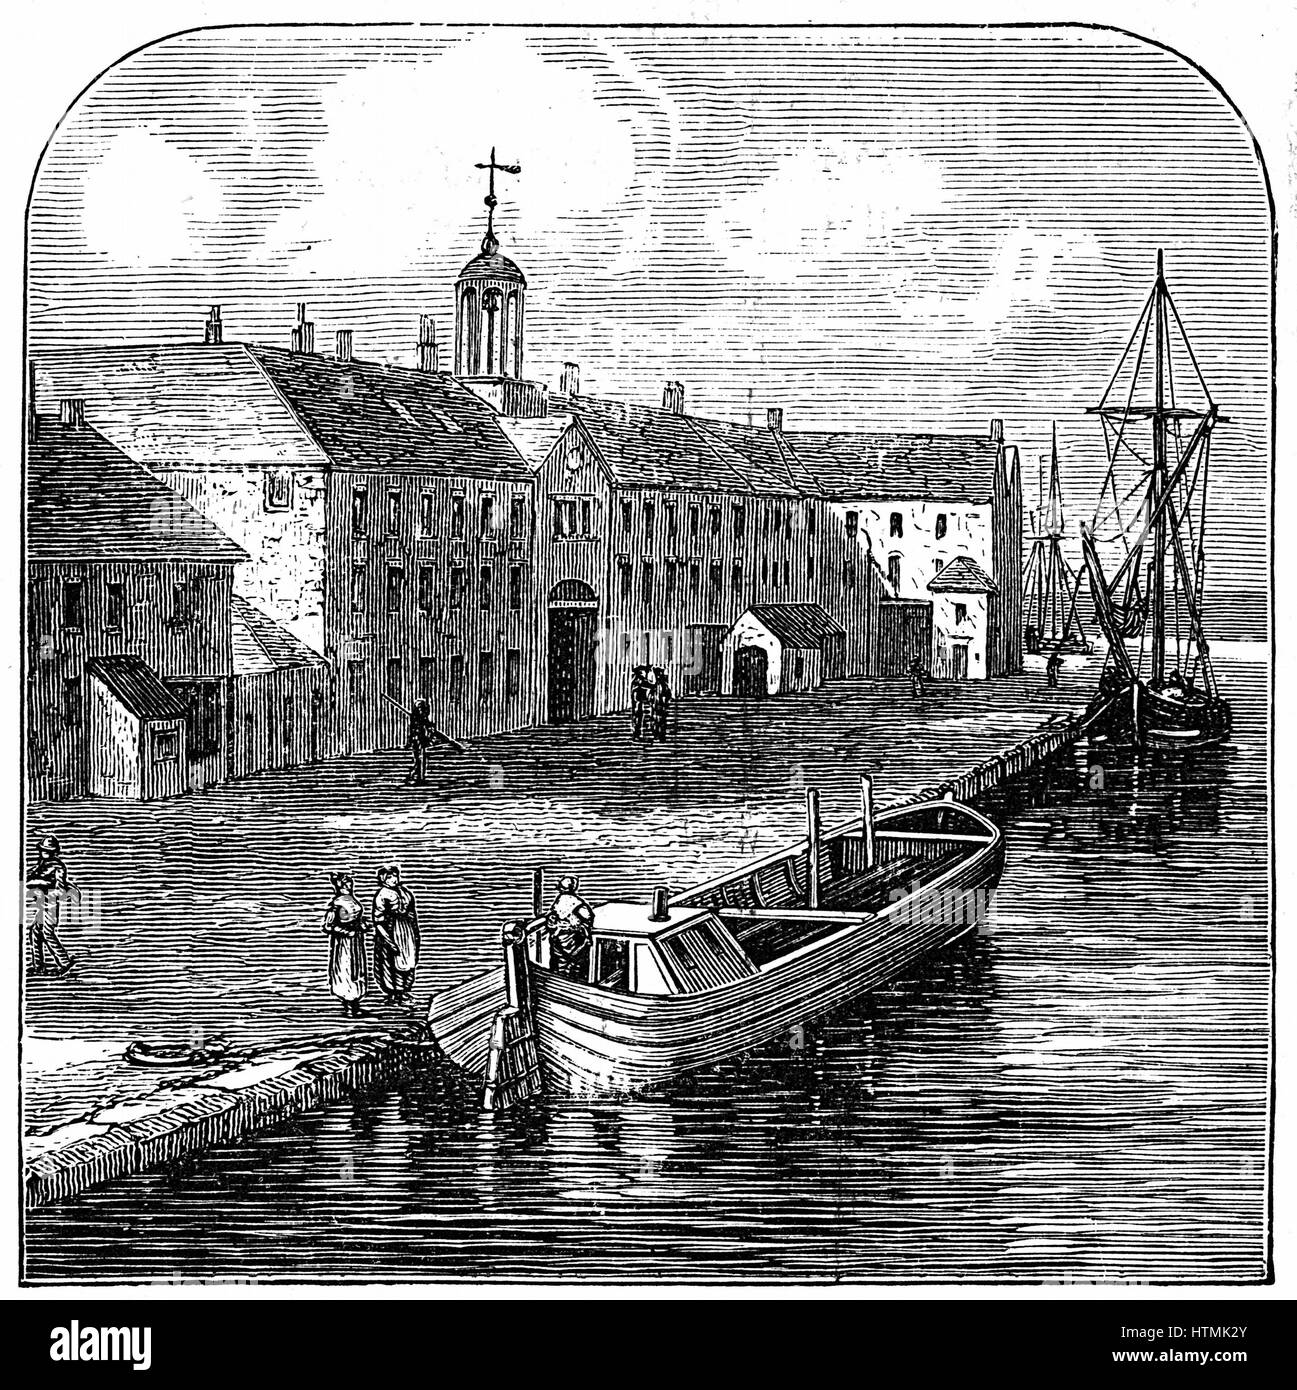 Wedgwood Etruria potteries, Hanley, Staffordshire viewed from the Etruria Canal which was constructed in order to transport finished wares from the potteries. Wood engraving Stock Photo